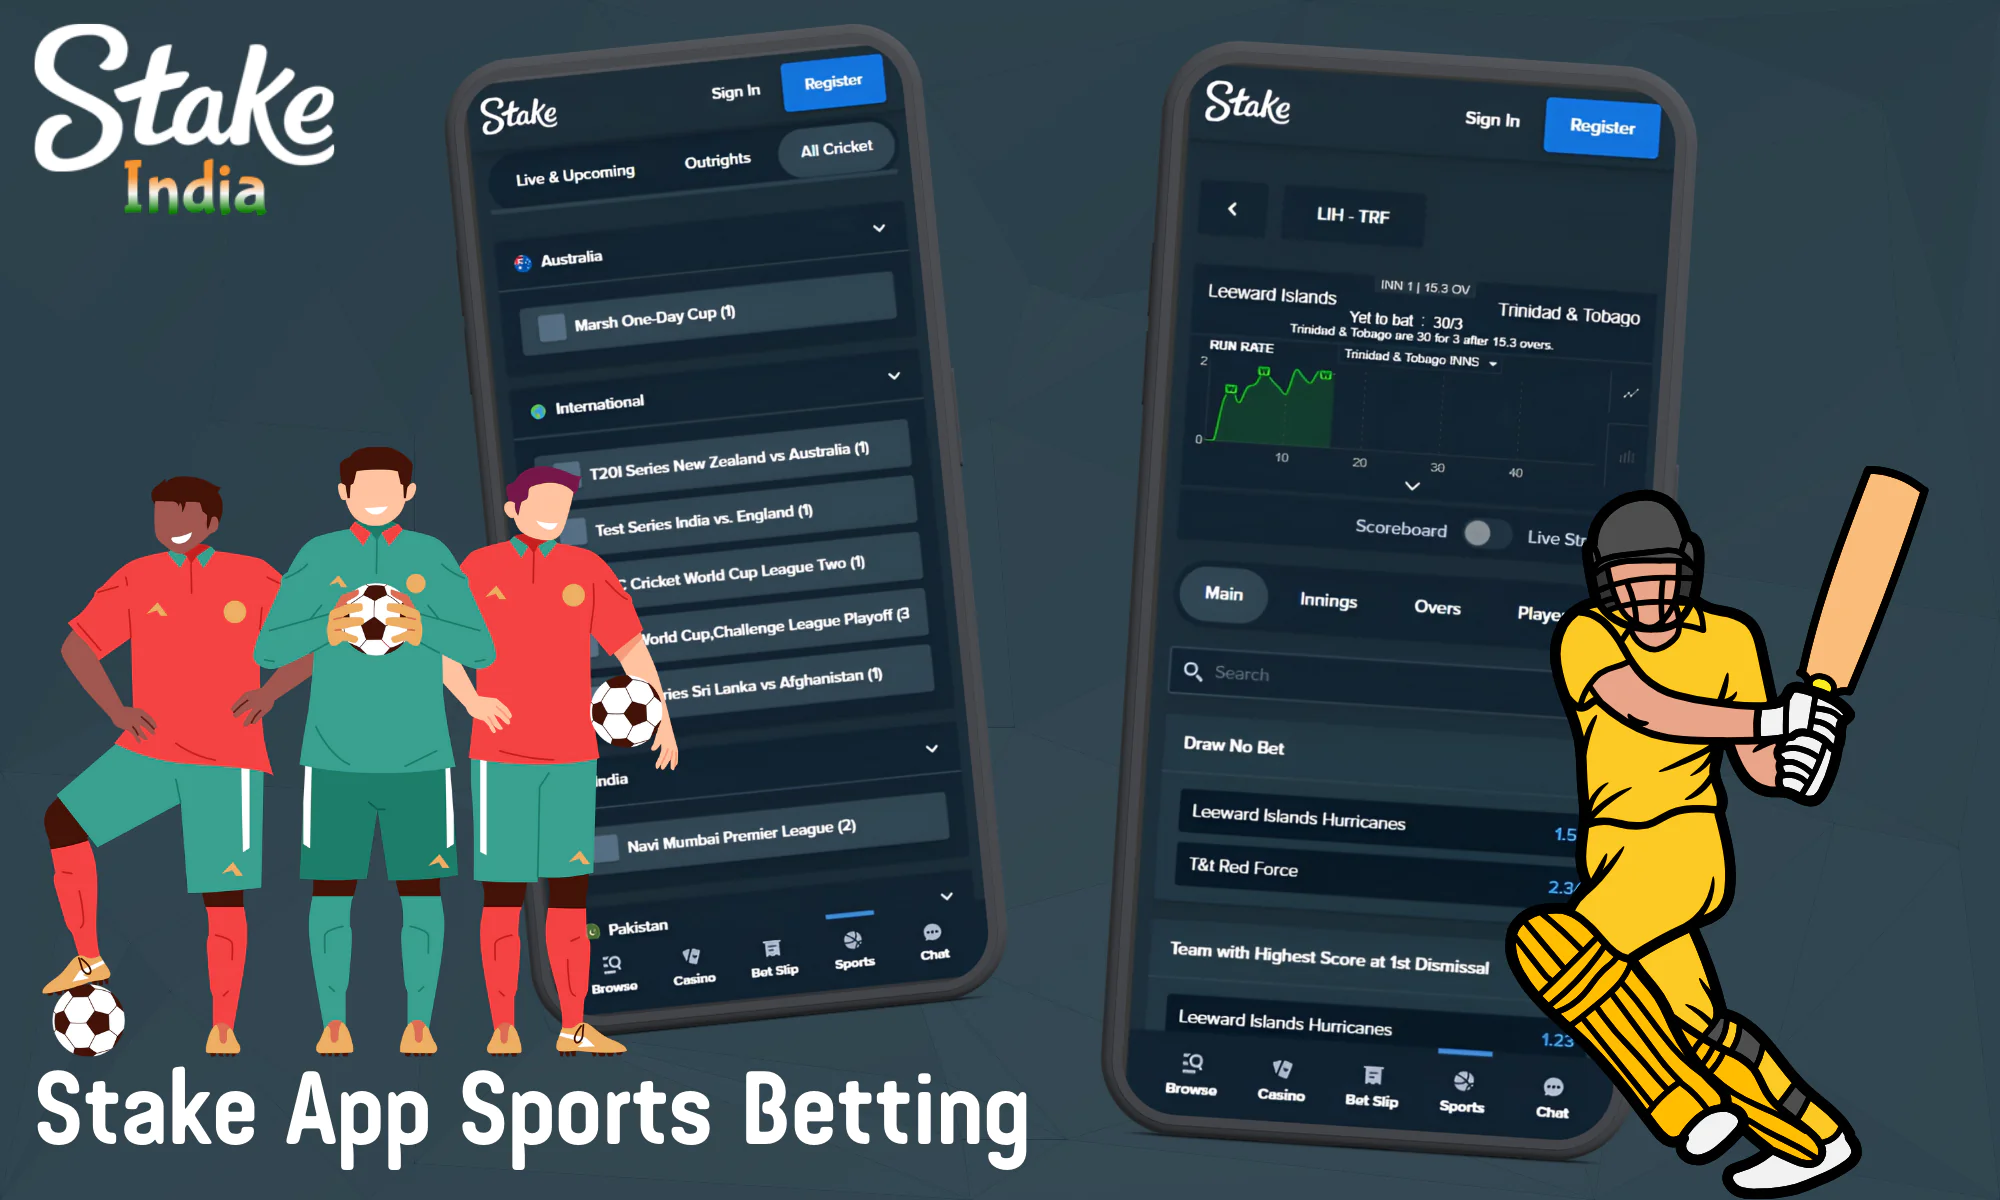 The Stake mobile app allows you to place bets on more than 30 sports